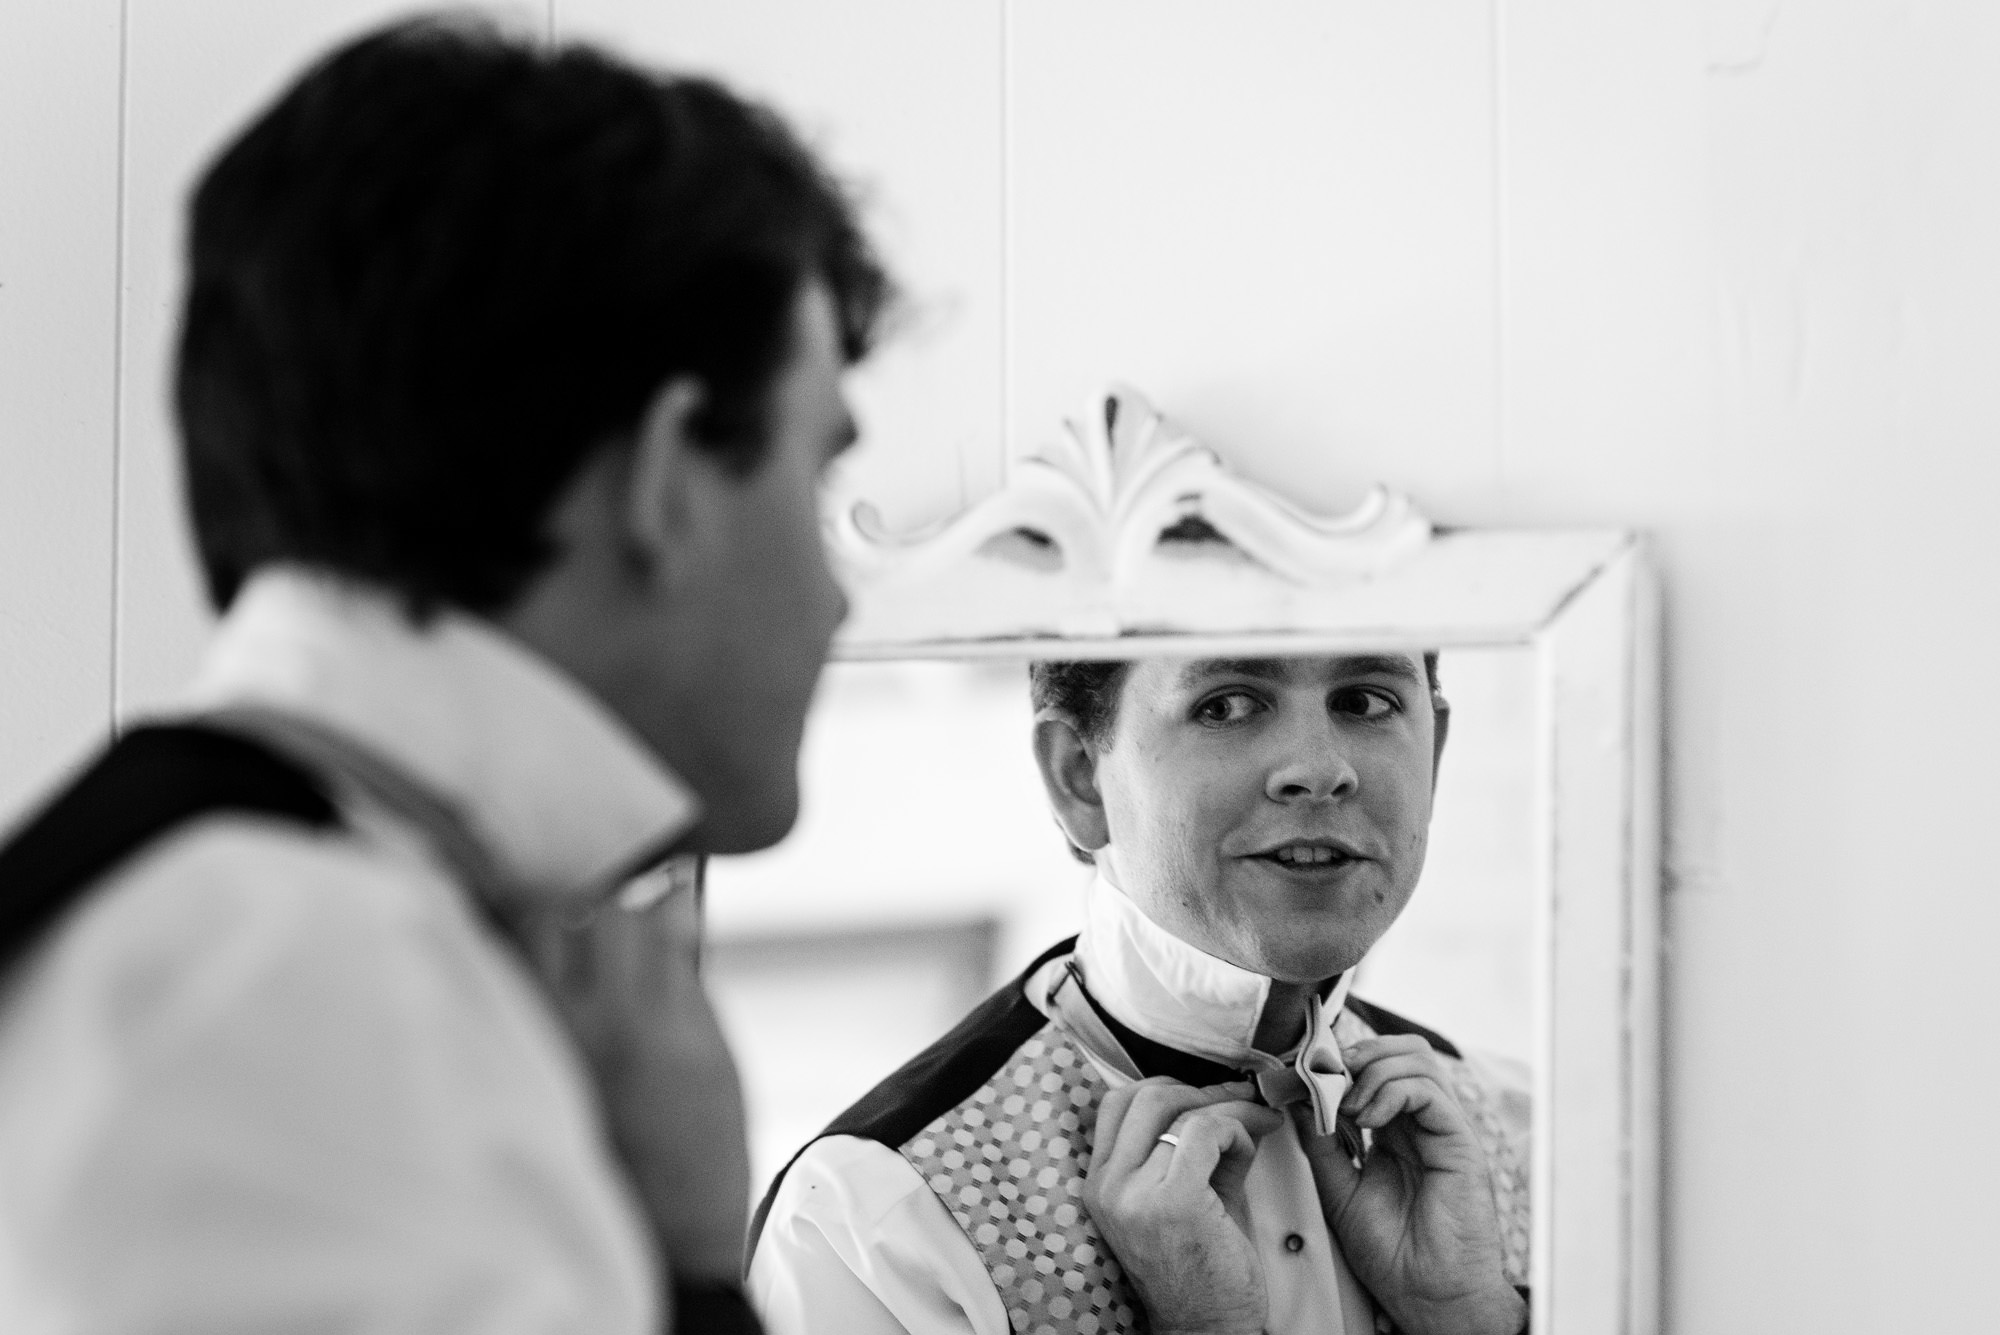 A groom prepares for his wedding day at the Bradley Inn in New Harbor, Maine